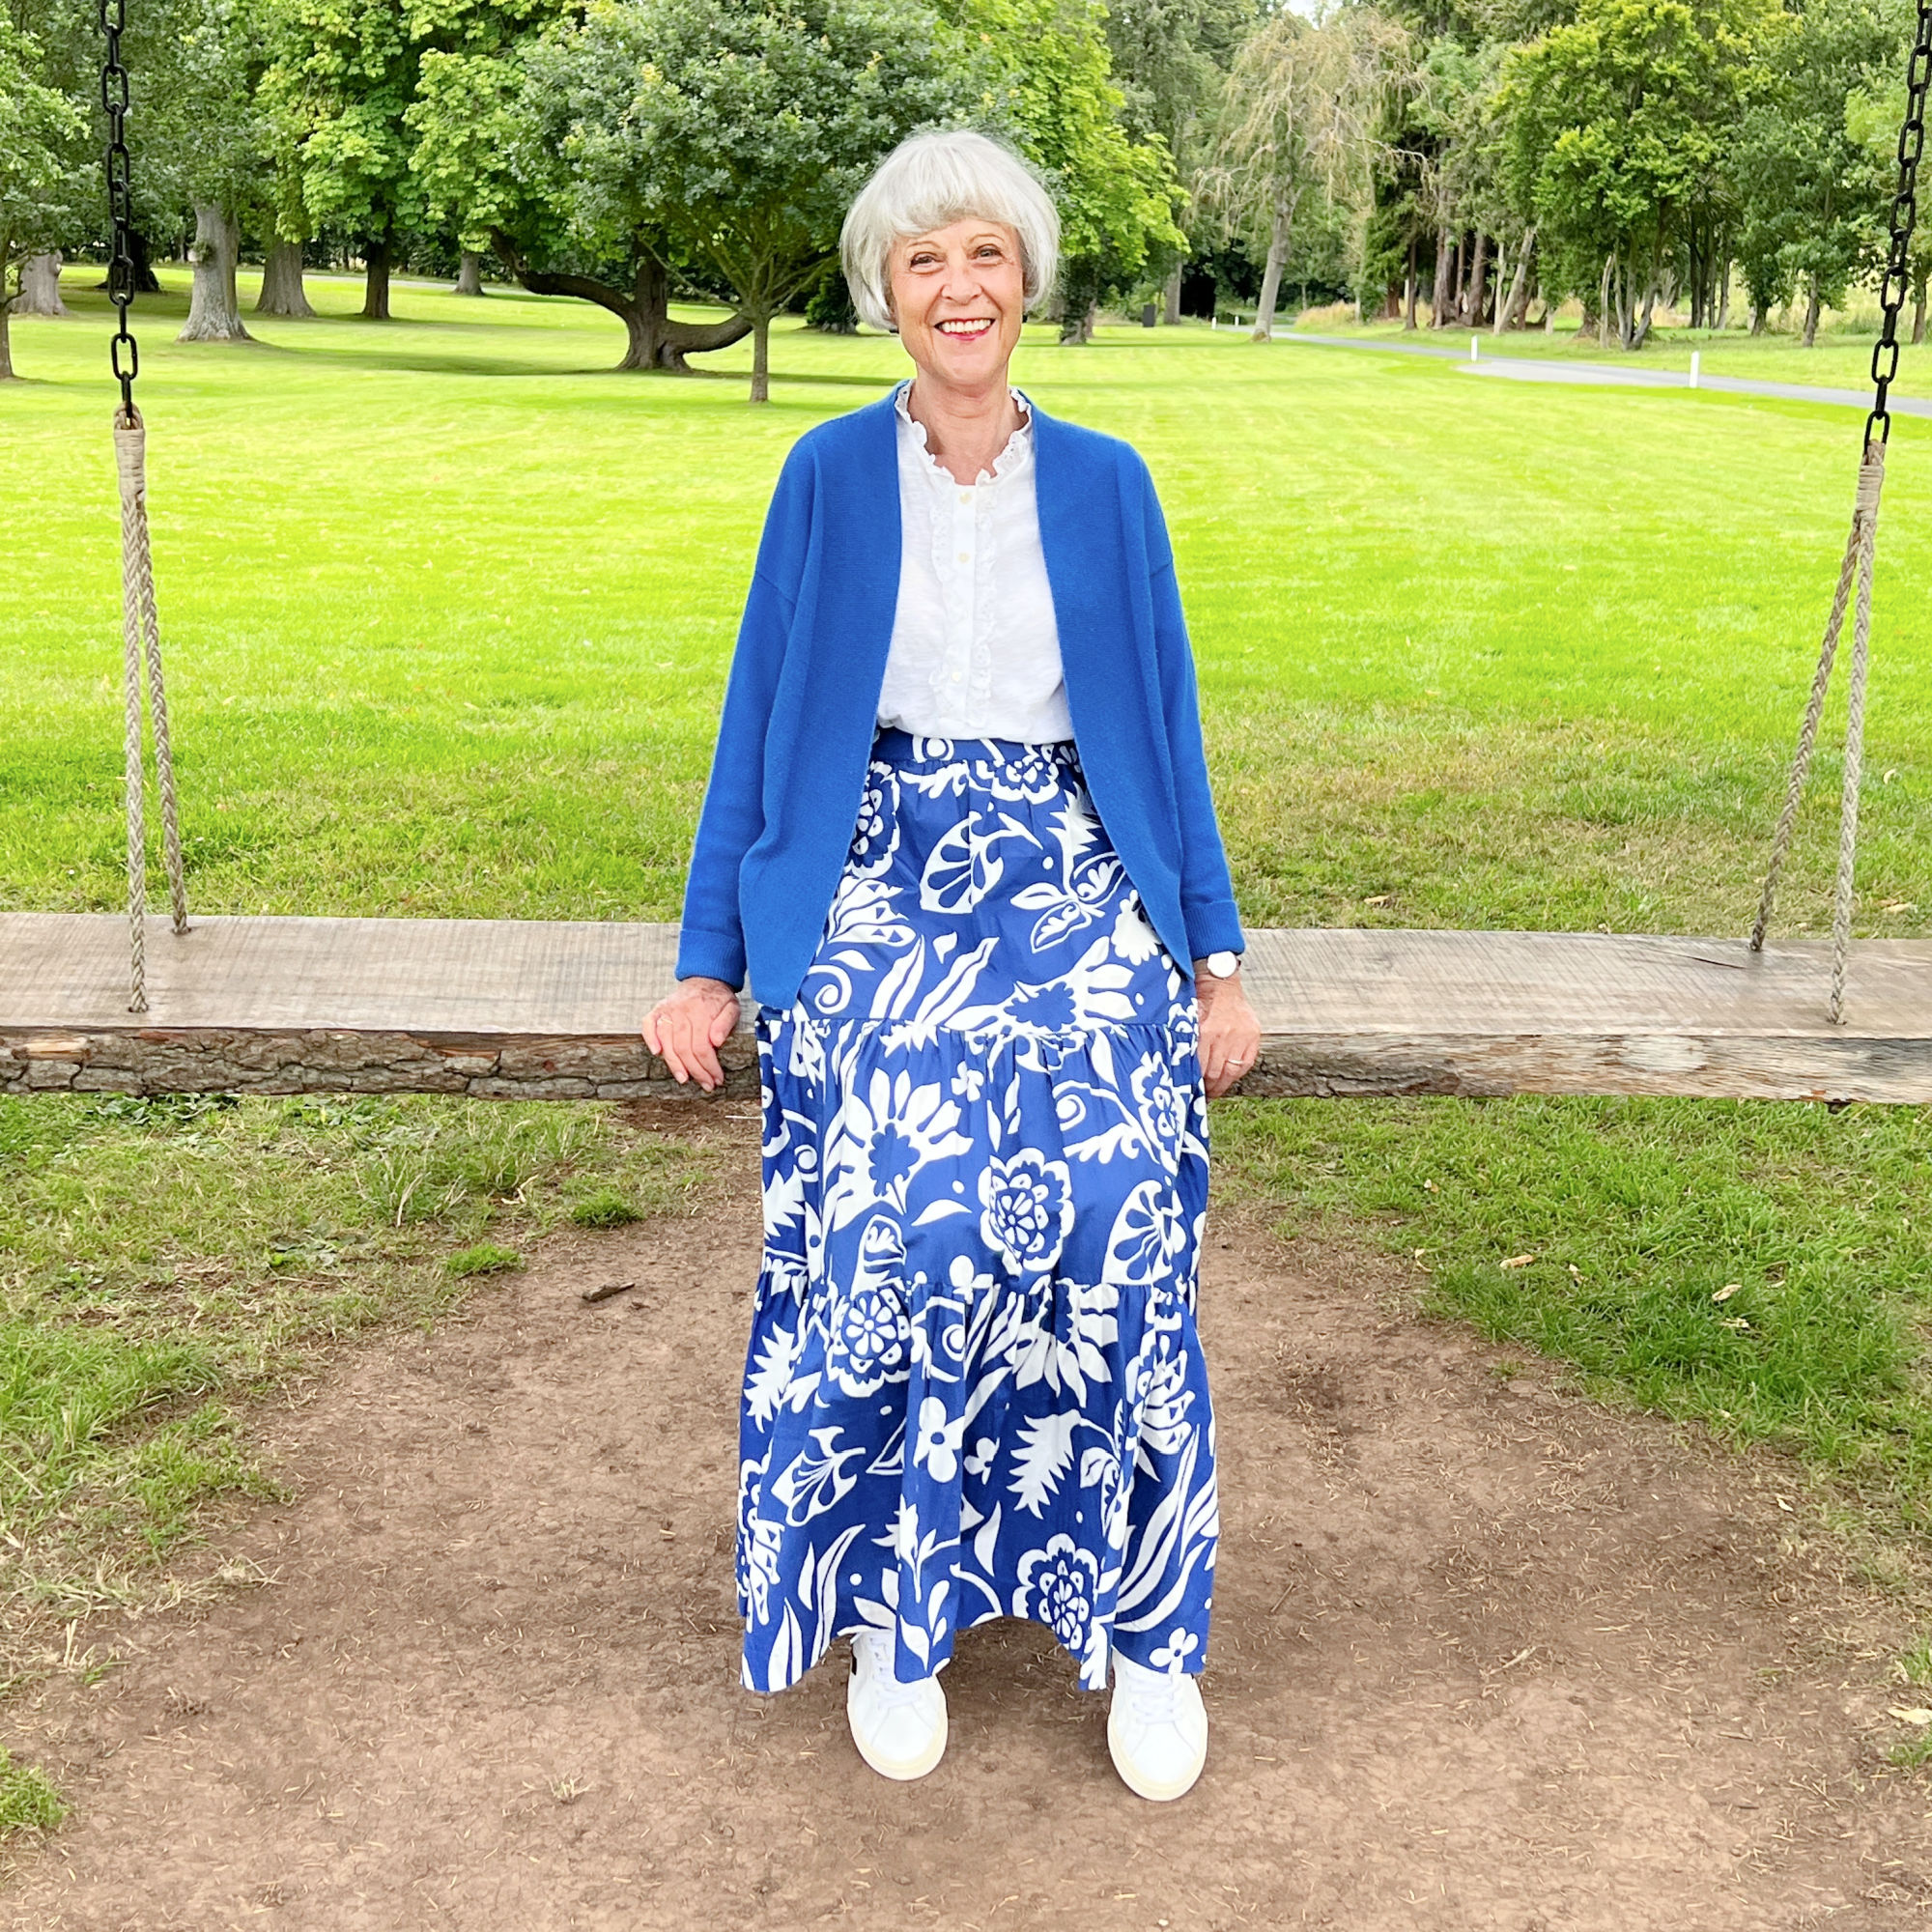 Blue print Boden skirt and blue cardigan